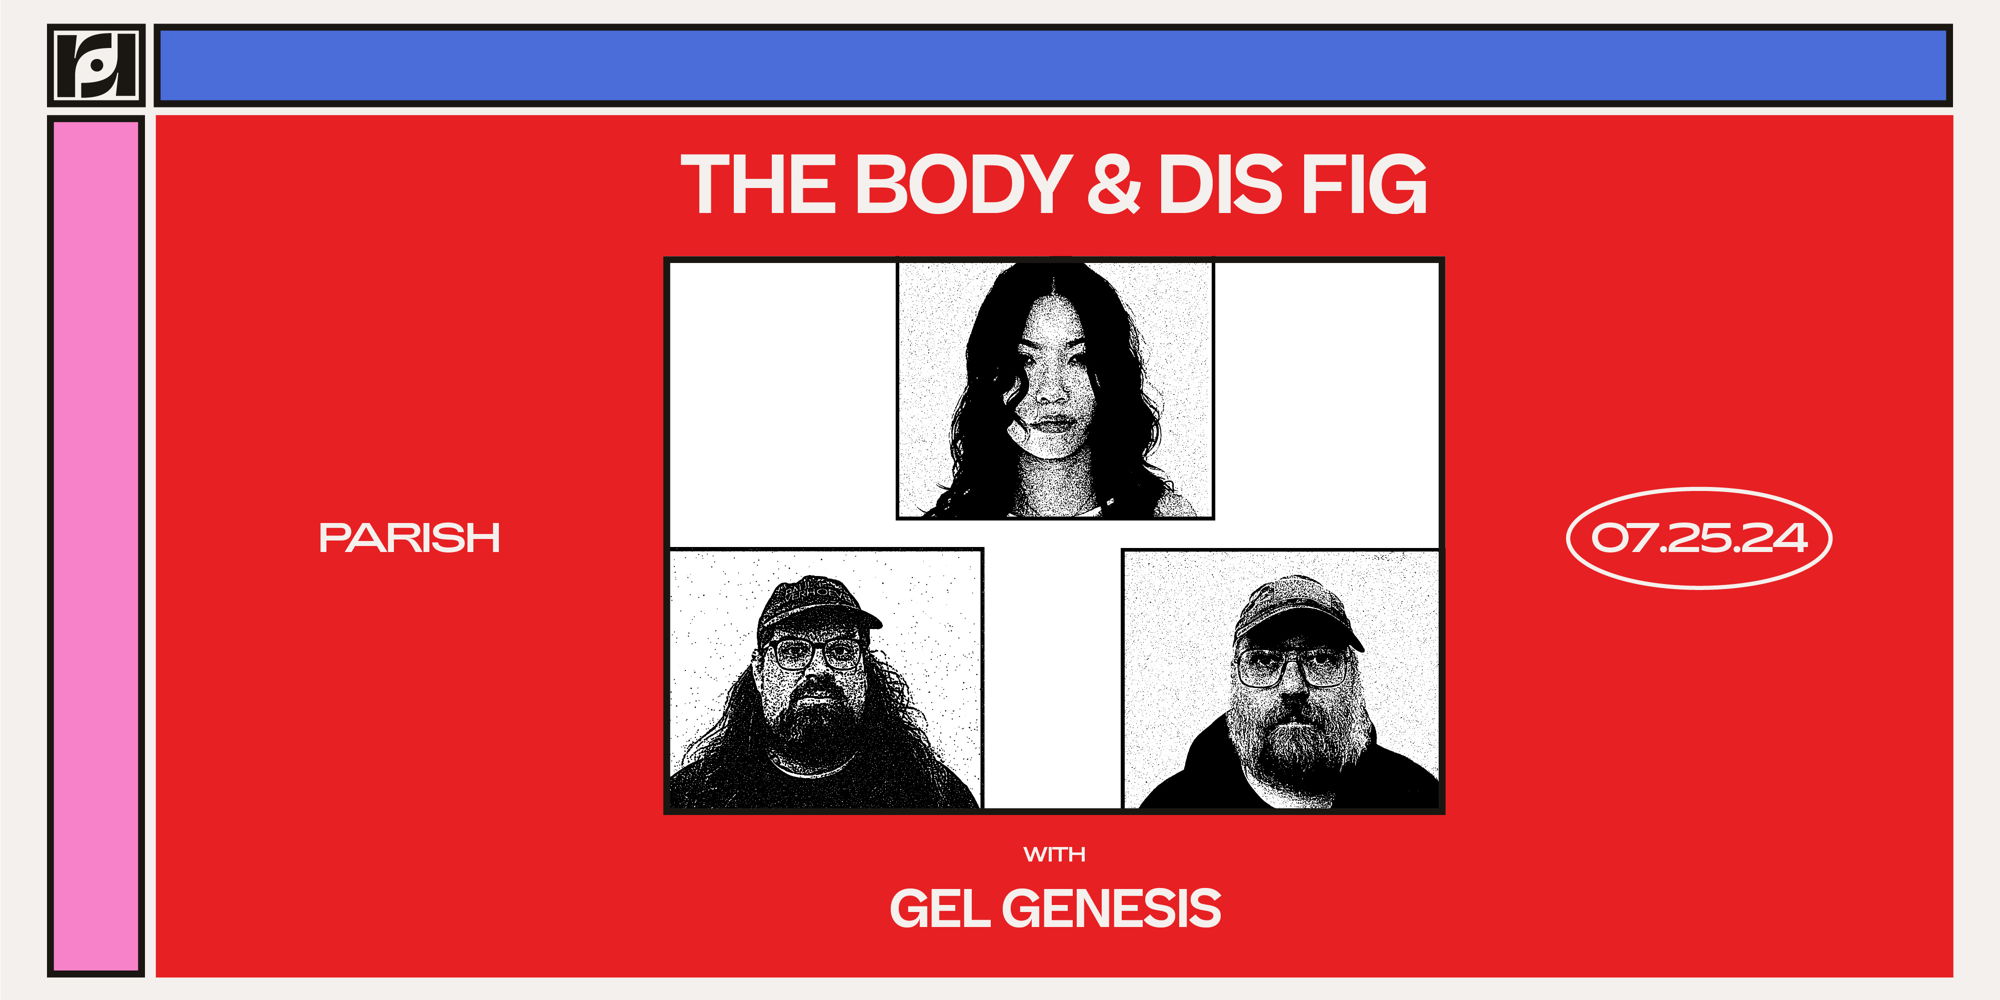 Resound Presents: The Body & Dis Fig w/ Cel Genesis at Parish on 7/25 promotional image